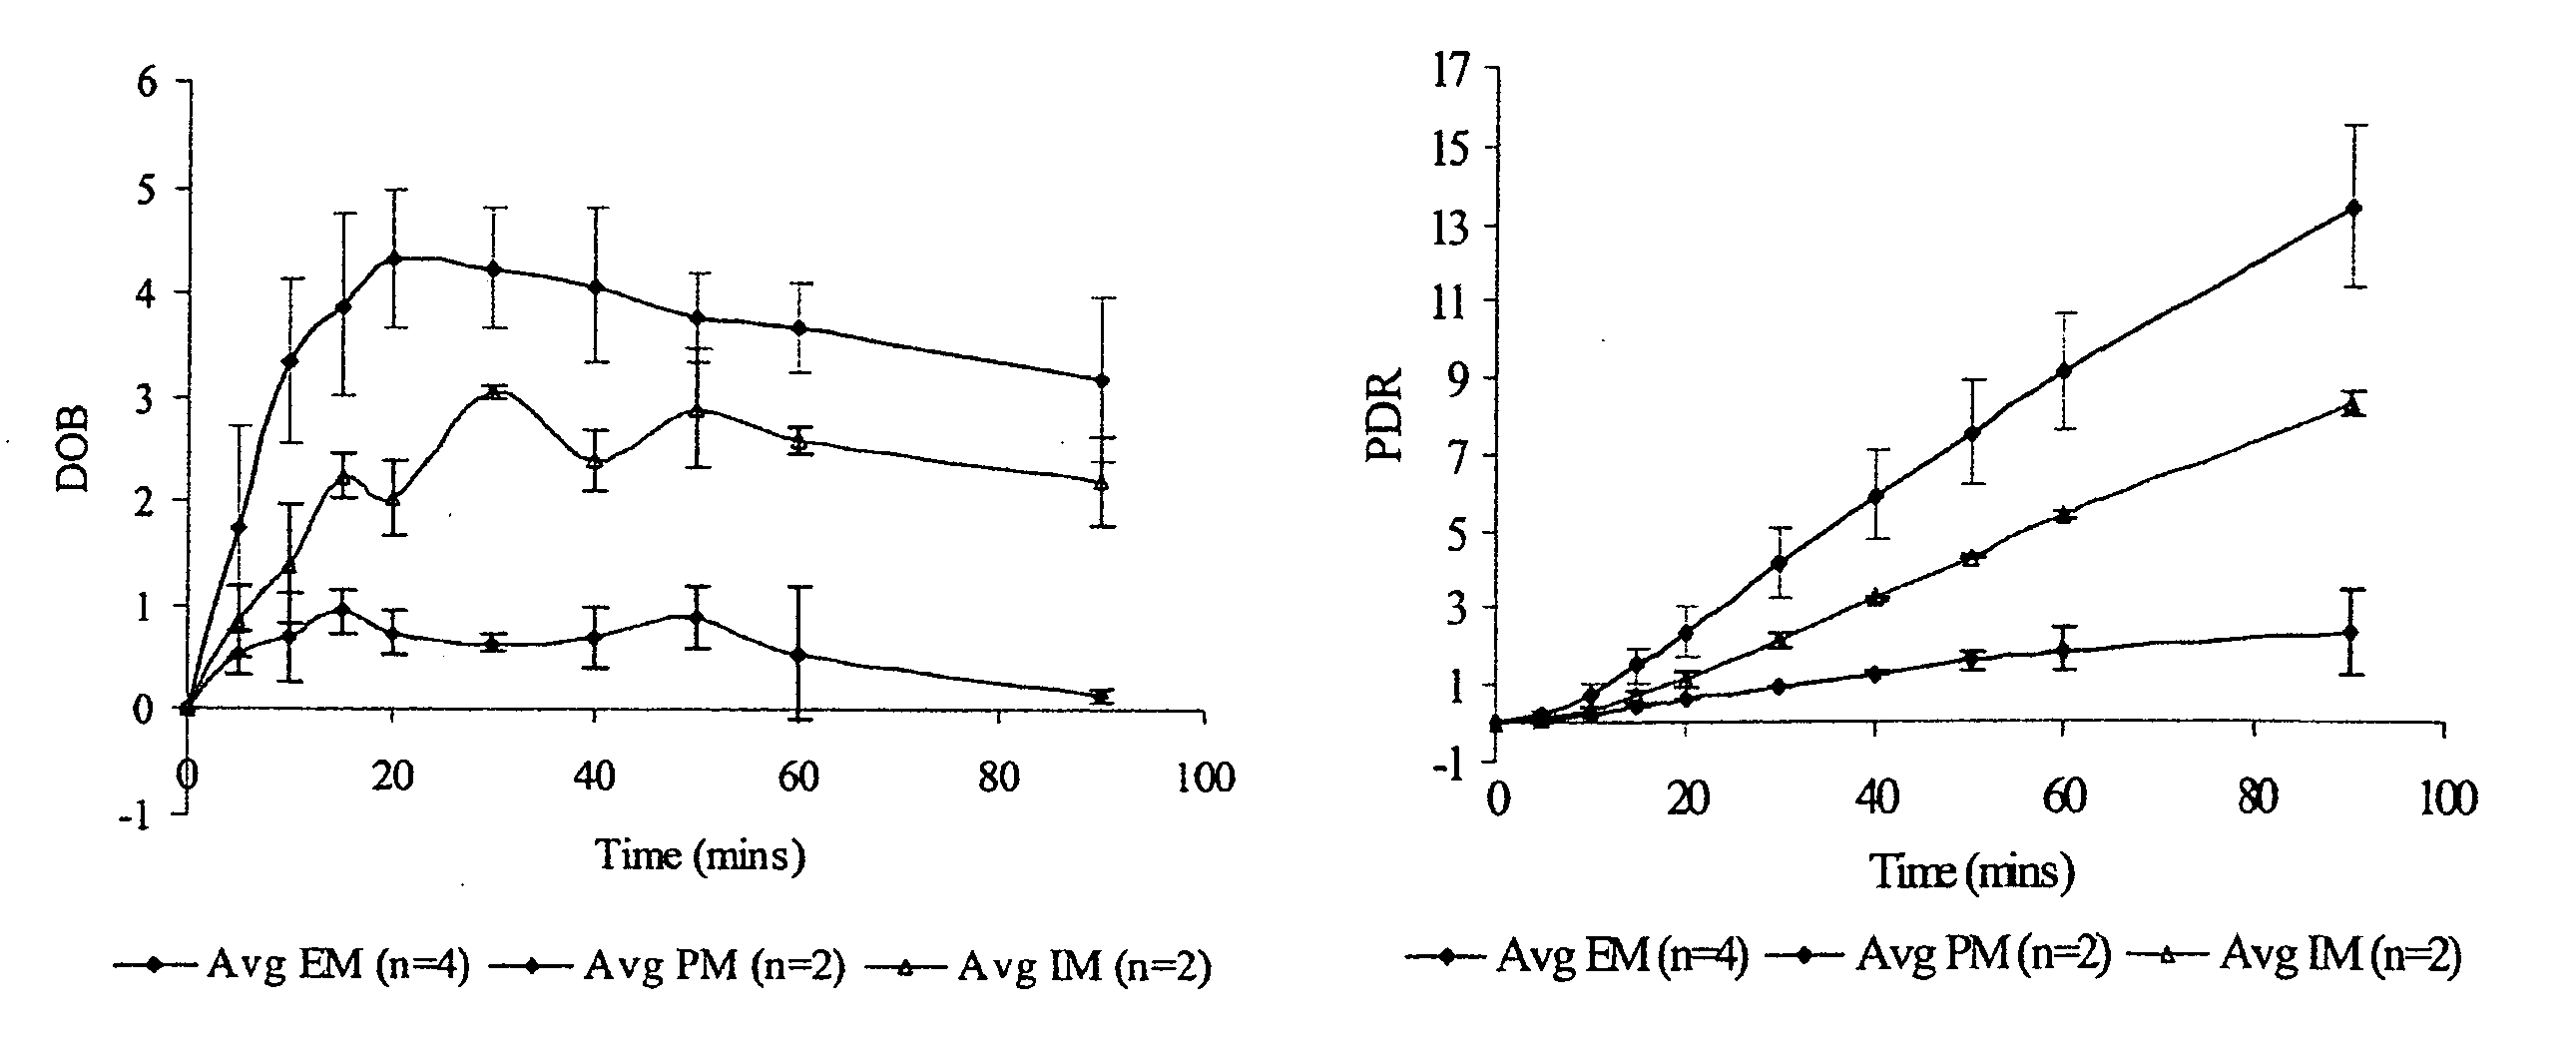 Method and composition to evaluate cytochrome p450 2c19 isoenzyme activity using a breath test